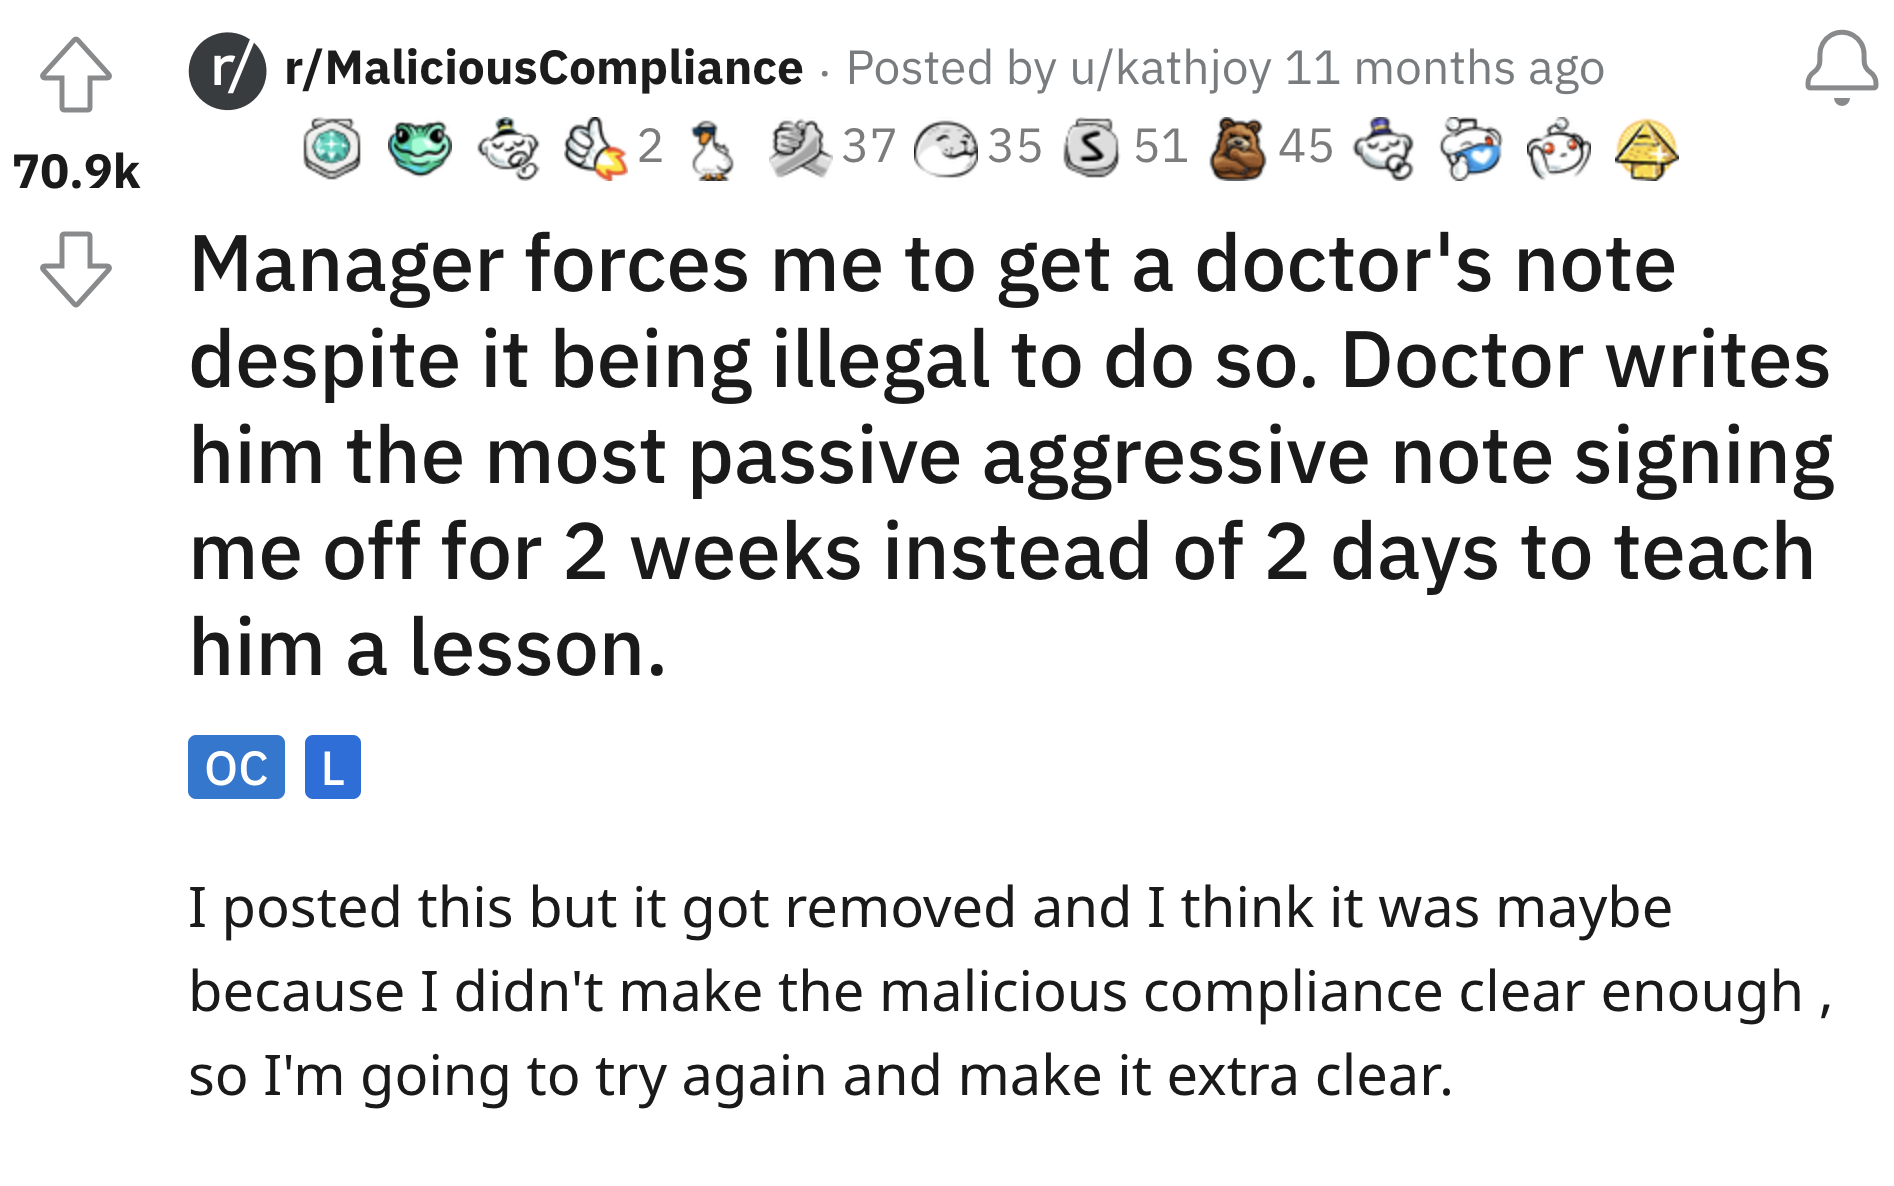 Boss Illegally Demands Doctor’s Note, So Doctor Recommends 2 Weeks Off - document